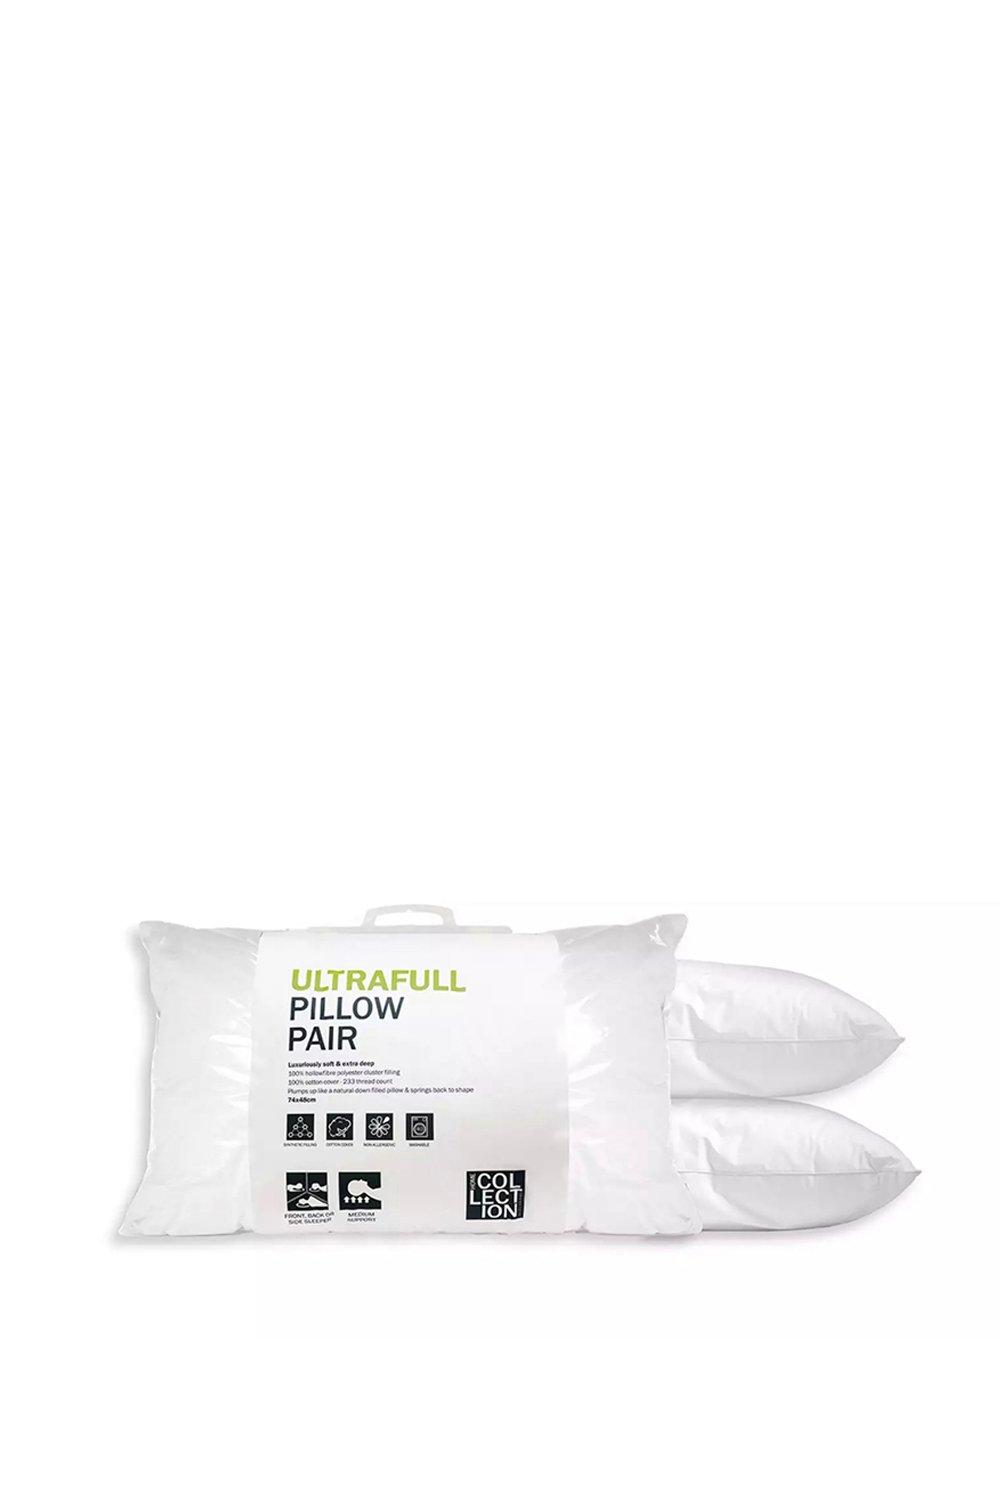 Picture of Ultrafull Pillow Pair